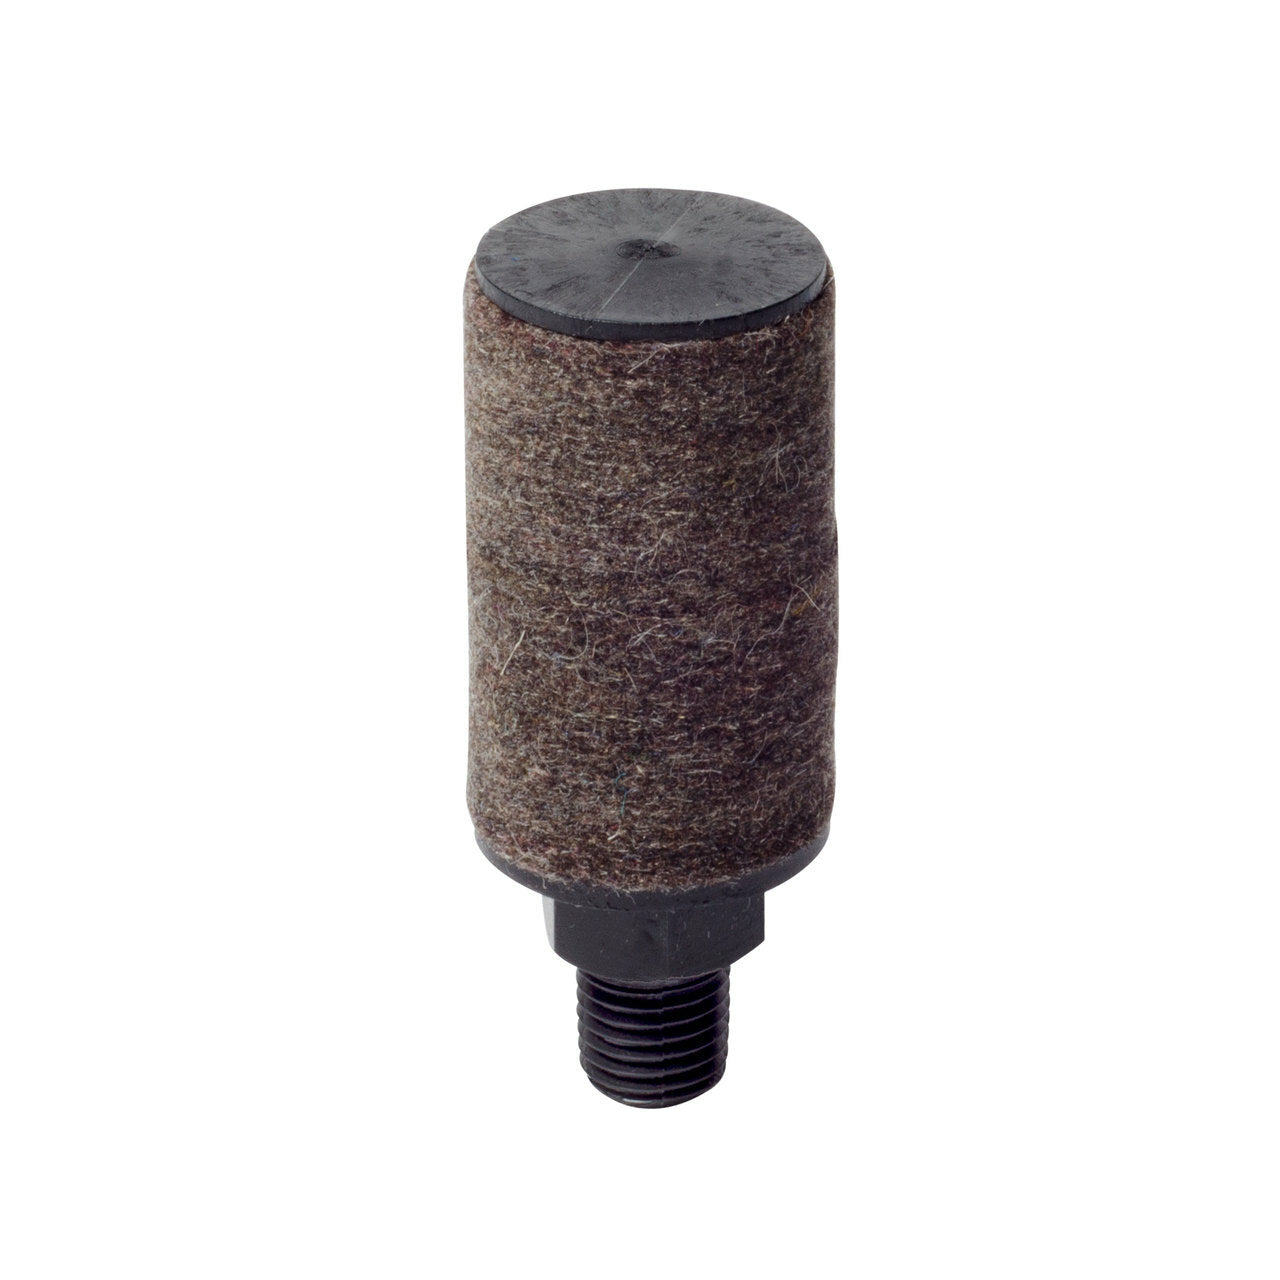 black upright cylindrical filter with threading on the bottom